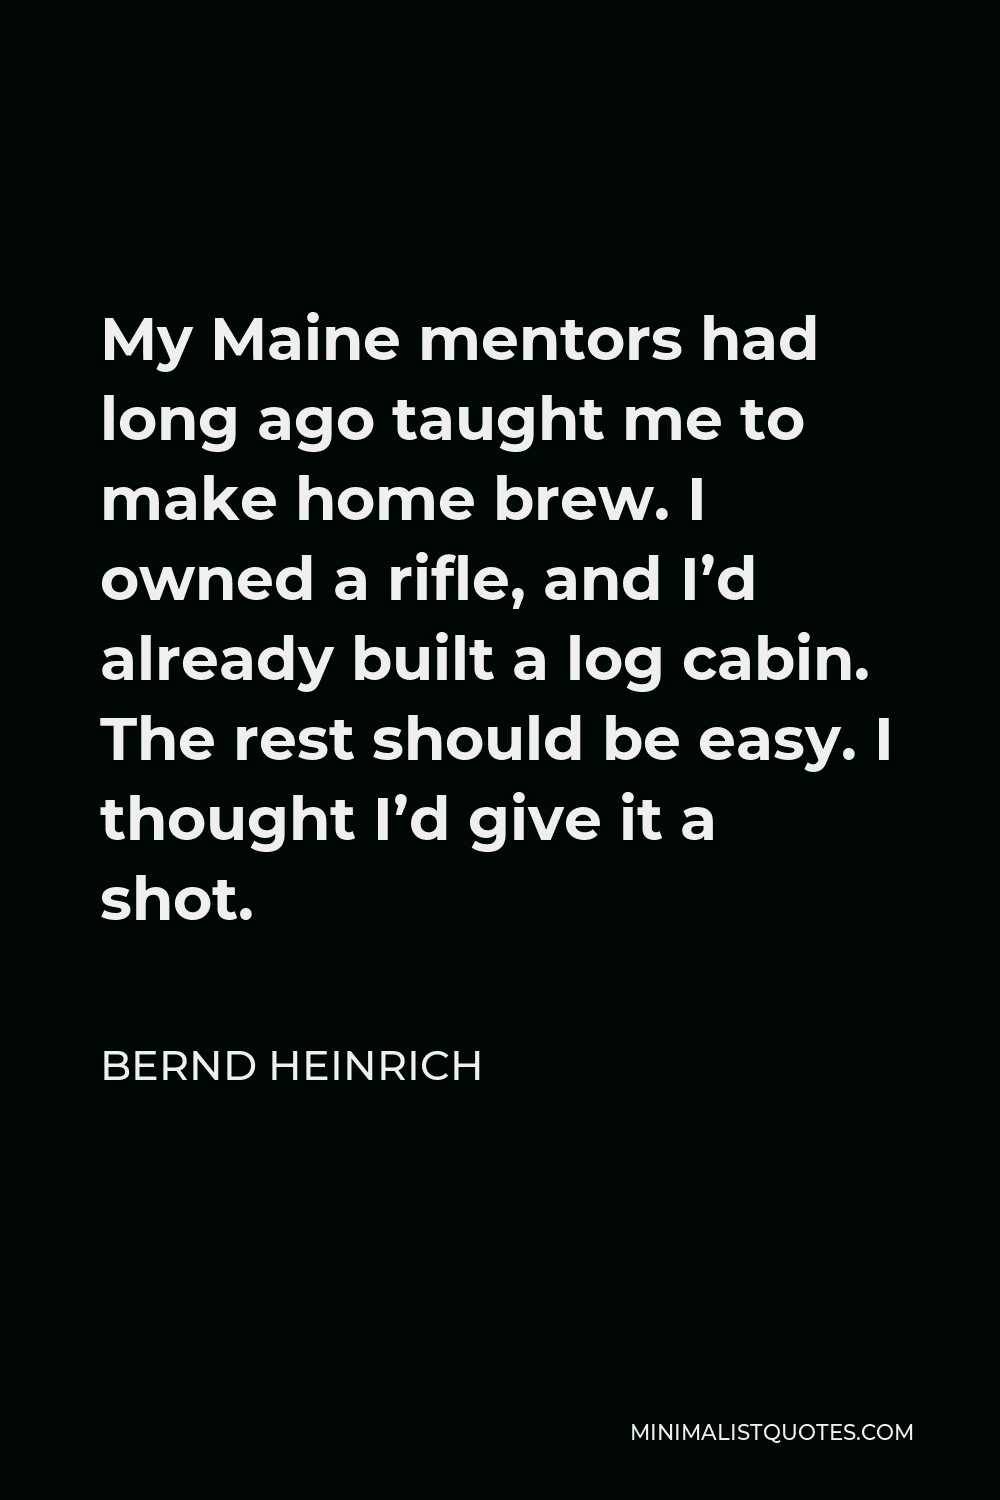 Bernd Heinrich Quote - My Maine mentors had long ago taught me to make home brew. I owned a rifle, and I’d already built a log cabin. The rest should be easy. I thought I’d give it a shot.